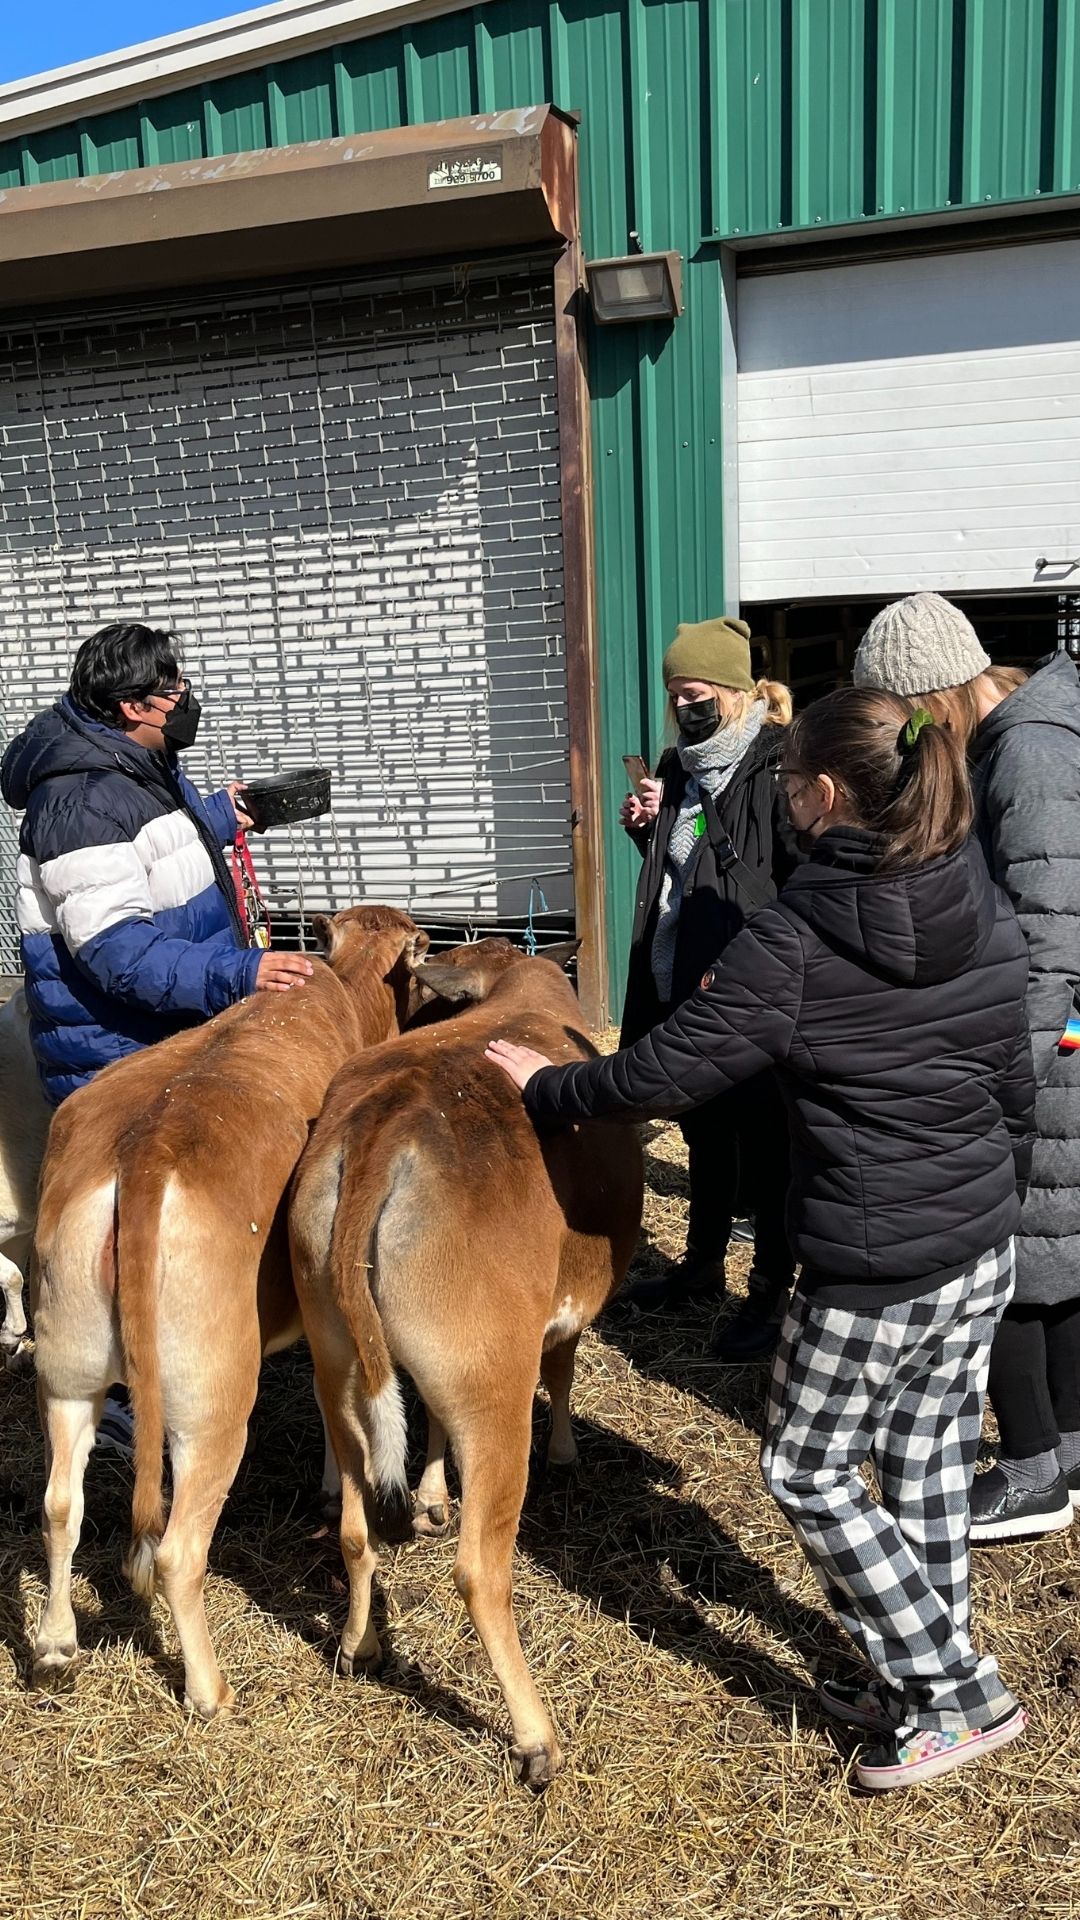 Students and adults pet two brown horses, whose backs are visible